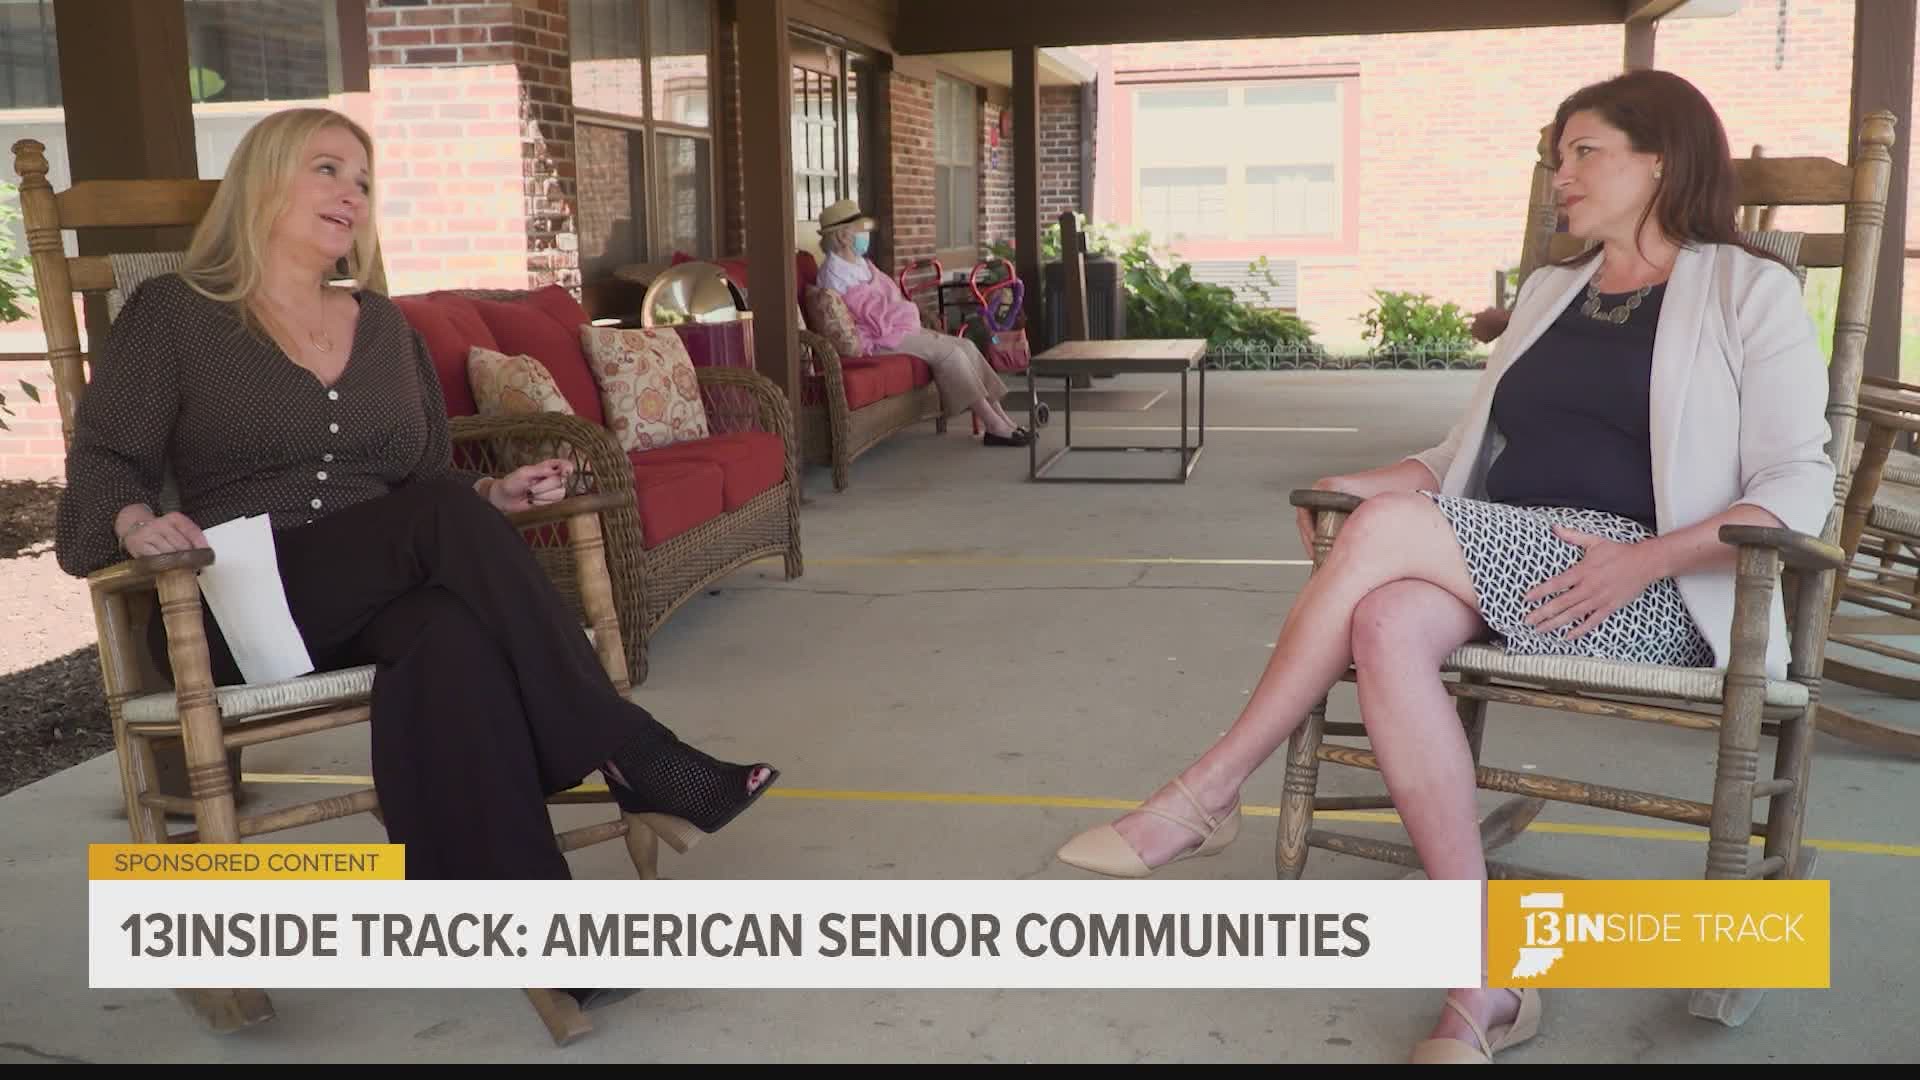 13INside Track checks in on the safety measures at American Senior Communities